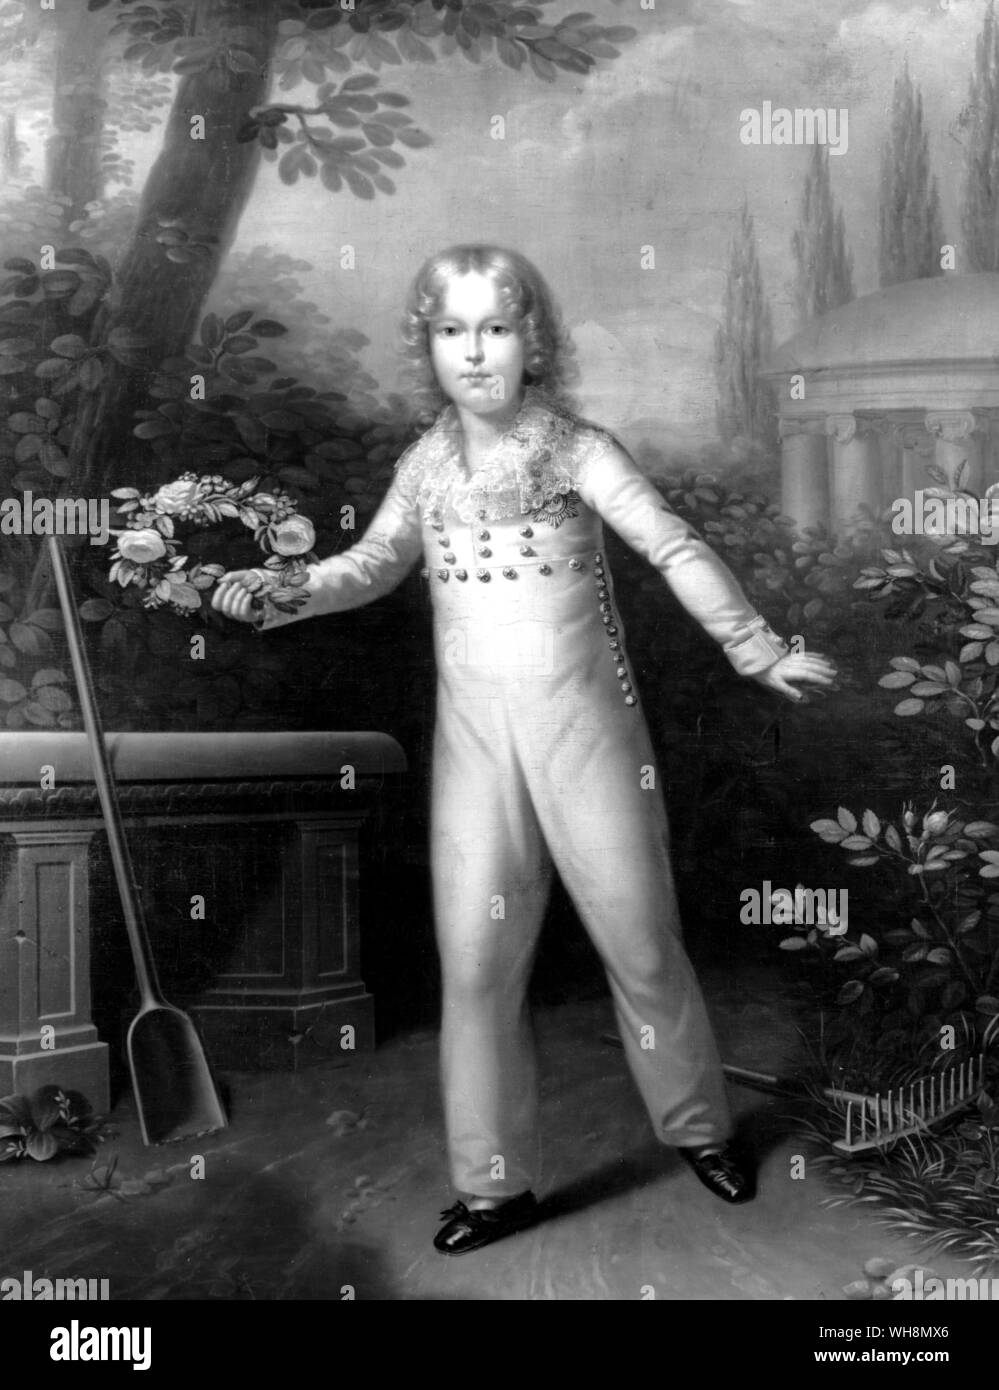 Bonaparte's son by Marie-Louise, Francois-Charles-Josephm, King of Rome (1811-32), at the age of six. Aftrer 1814 he lived in Austria under the title of Duc de Reichstadt. Painting by Carl von Sales. Kunsthistorisches Museum, Vienna Stock Photo